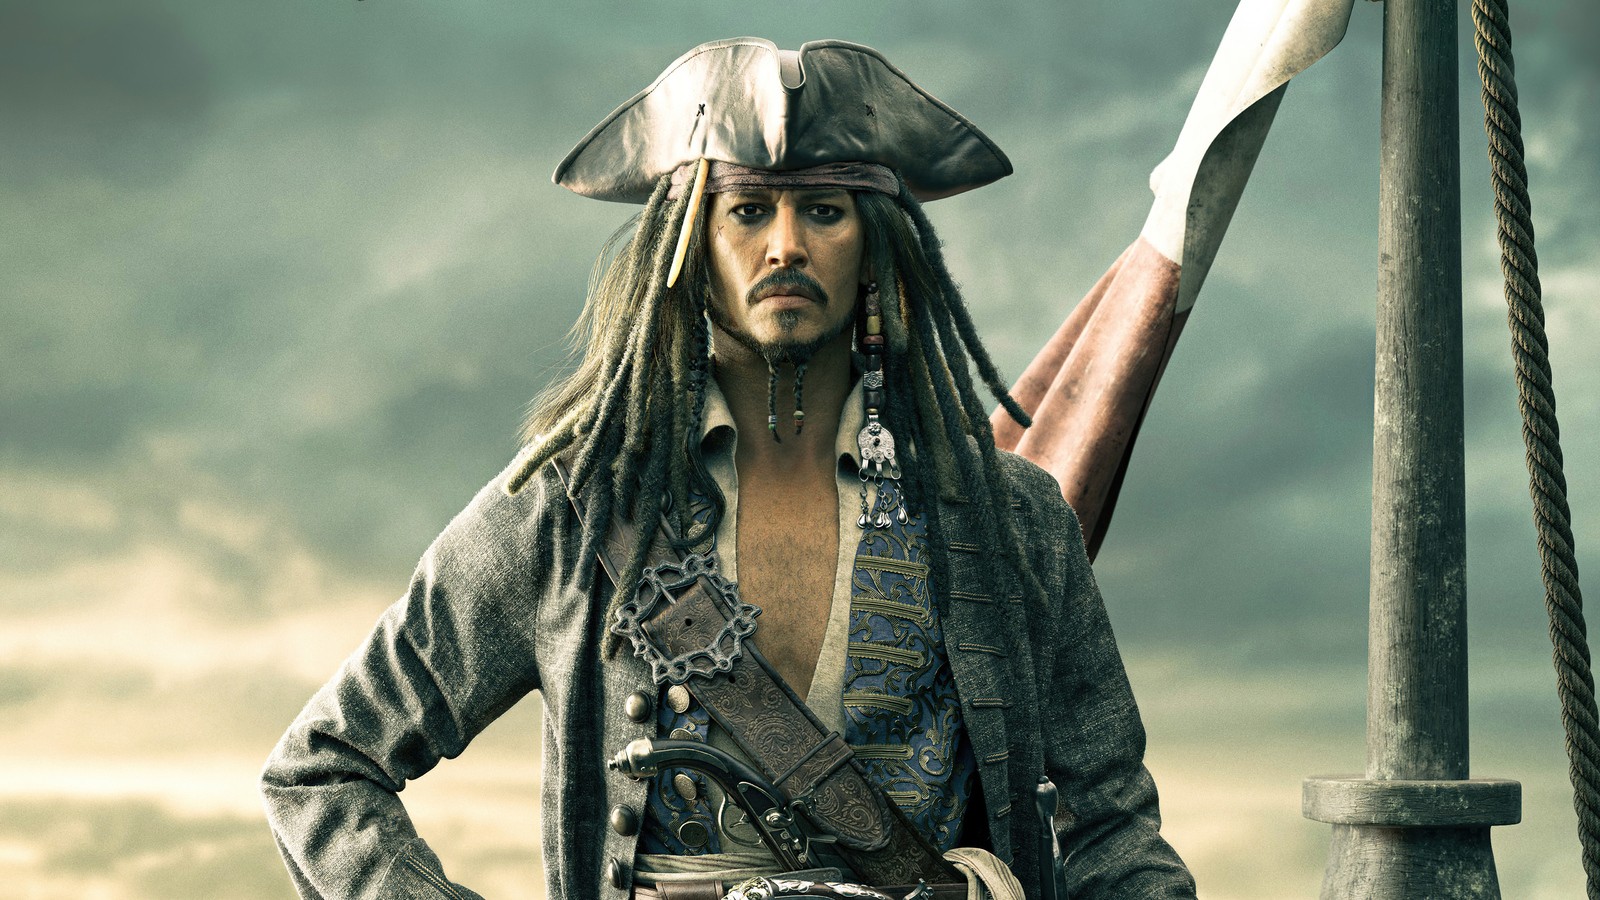 Pirates of the Caribbean 6 might not have Johnny Depp as Sparrow